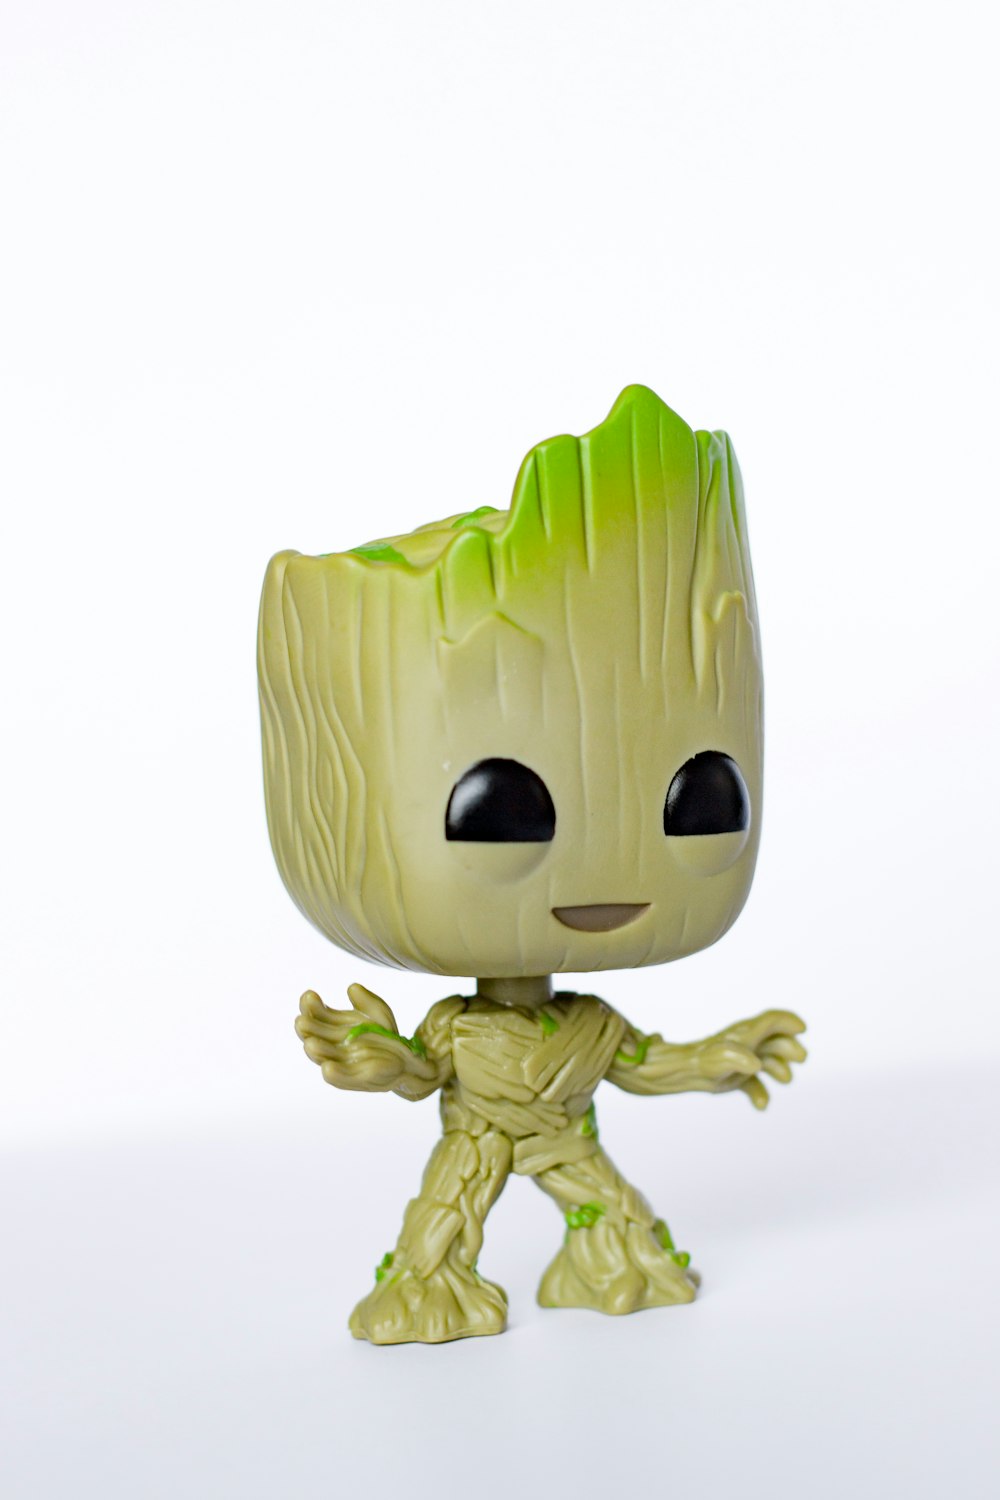 baby Groot toy